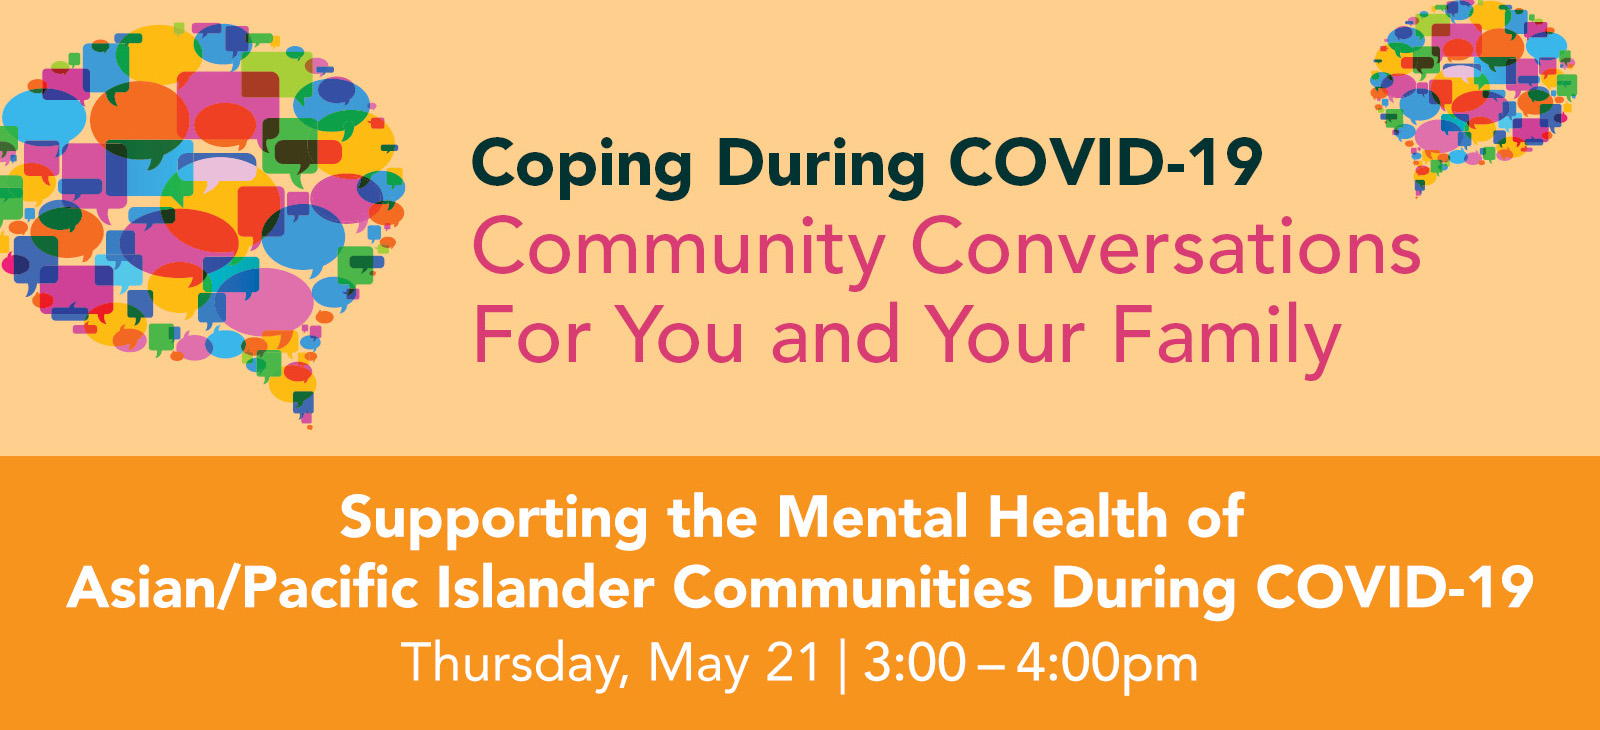 Supporting the Mental Health of APAC Communities During Covid-19 graphic